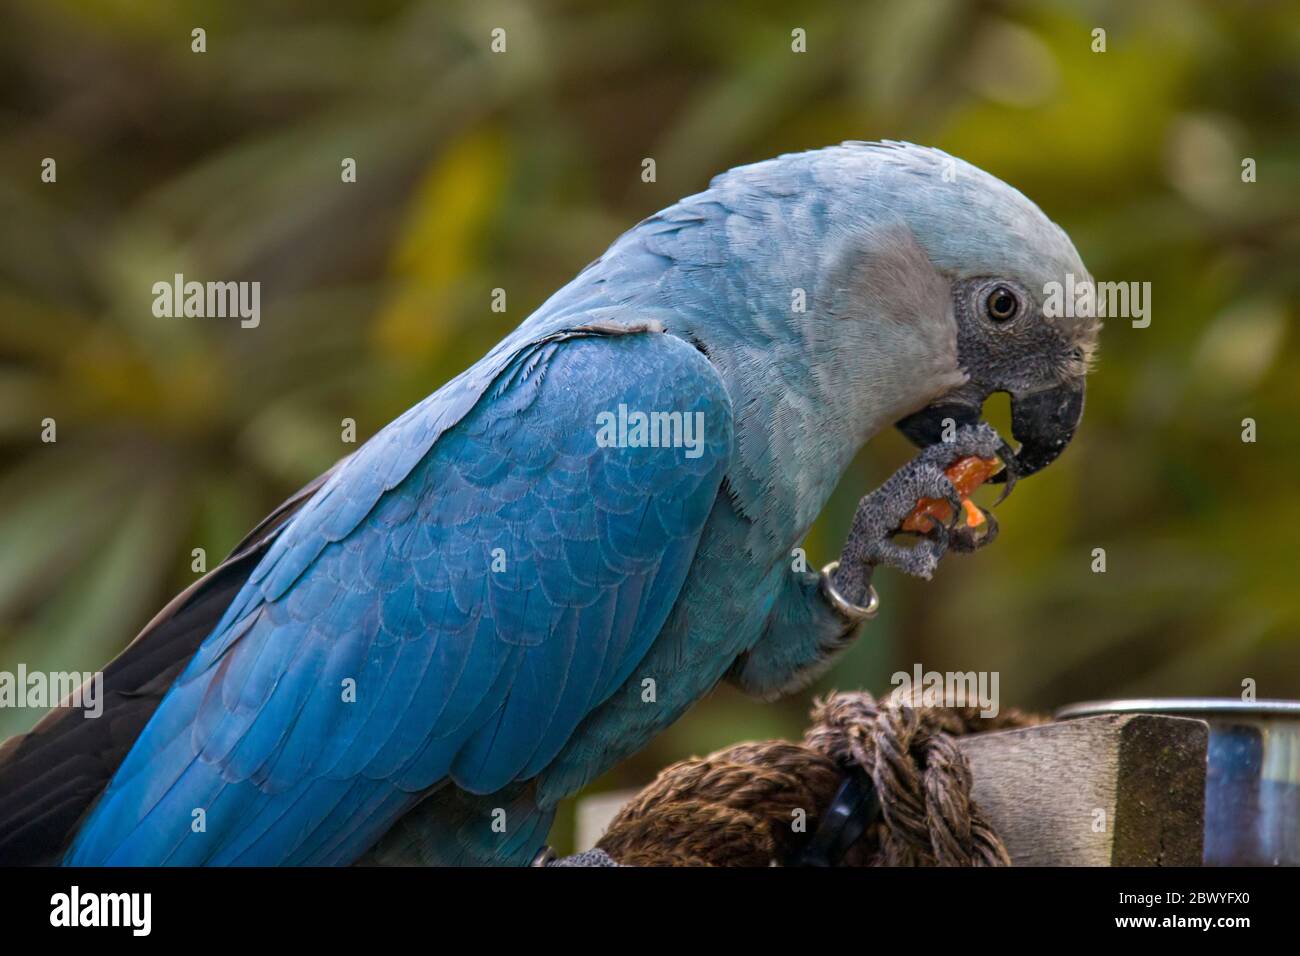 The Spix's macaw is a macaw native to Brazil. The bird is a medium-size parrot. The IUCN regard the Spix's macaw as probably extinct in the wild. Stock Photo